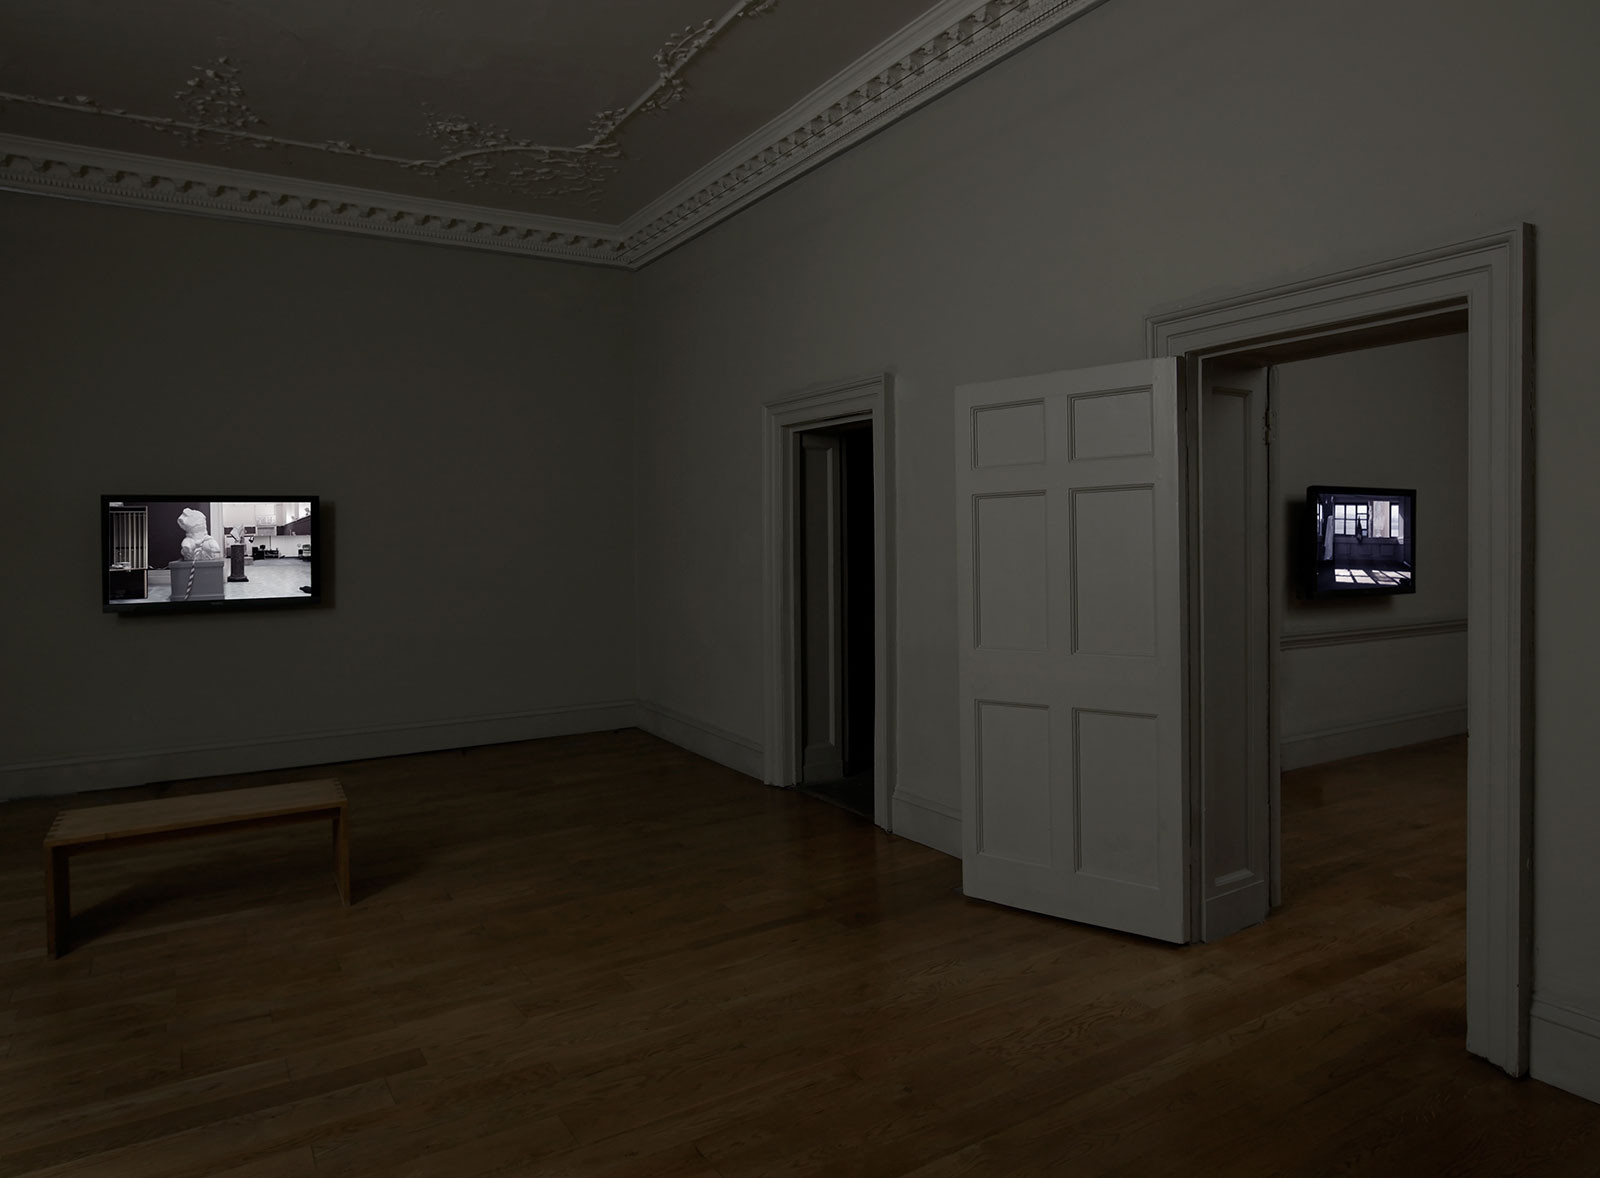 Exhibition view, Domobaal, London, 2011.